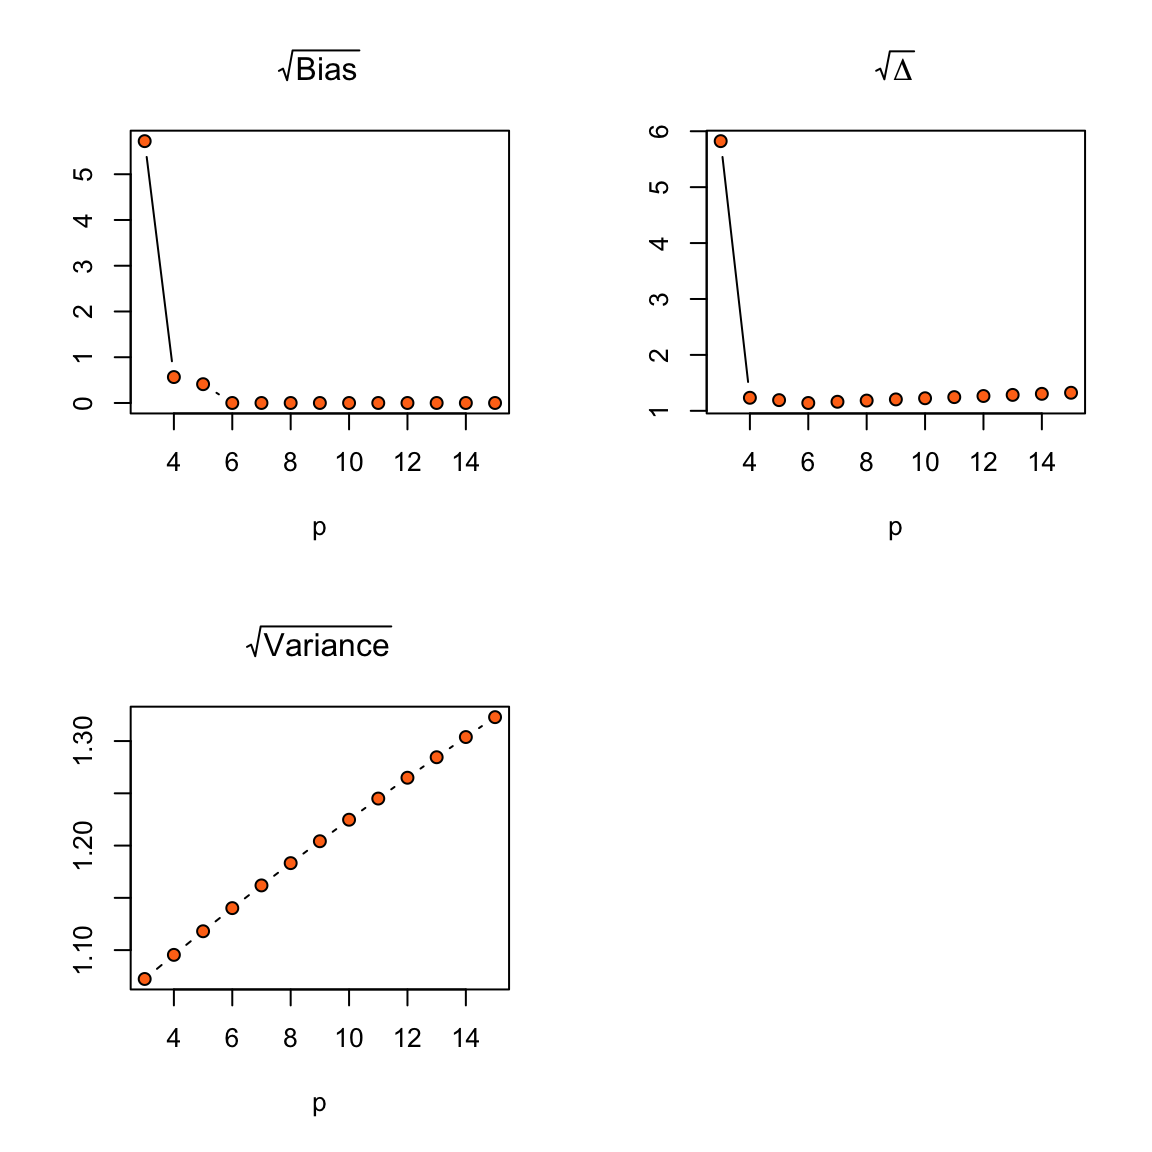 $\Delta$ for models with varying polynomial degree.